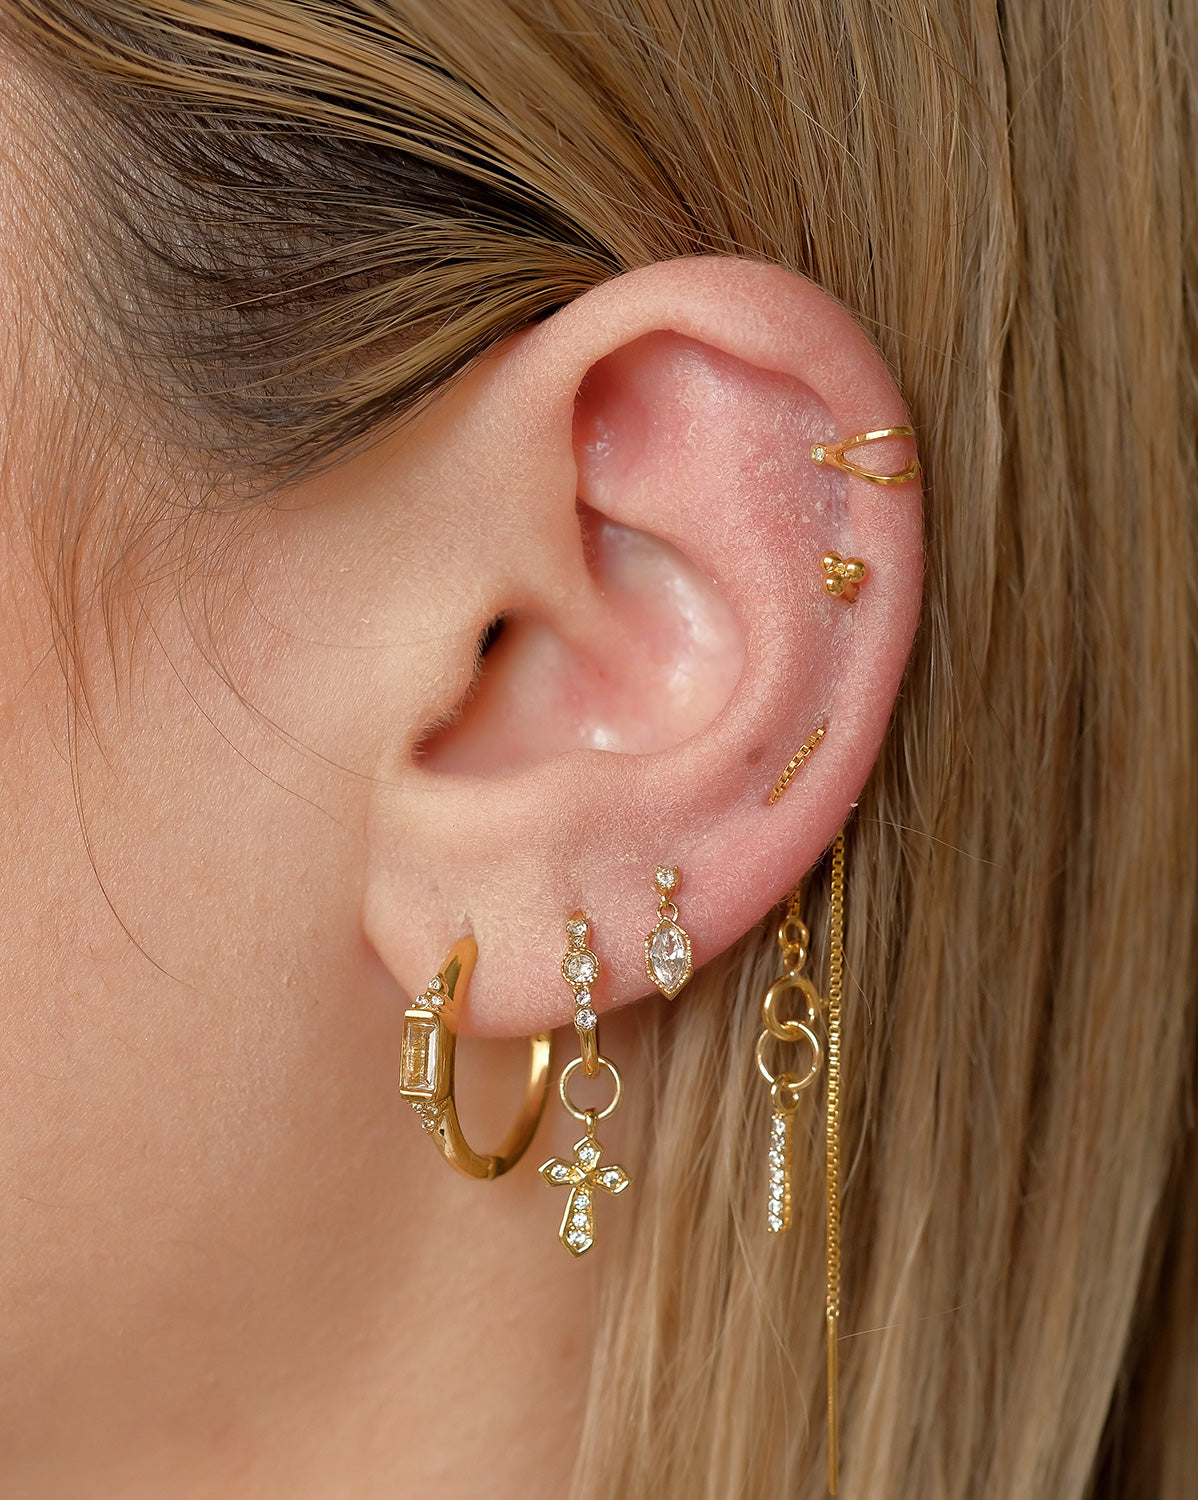 Ear Cartilage Piercing: Your Piercing Questions Answered By Beyoncé's  Personal Ear Piercer